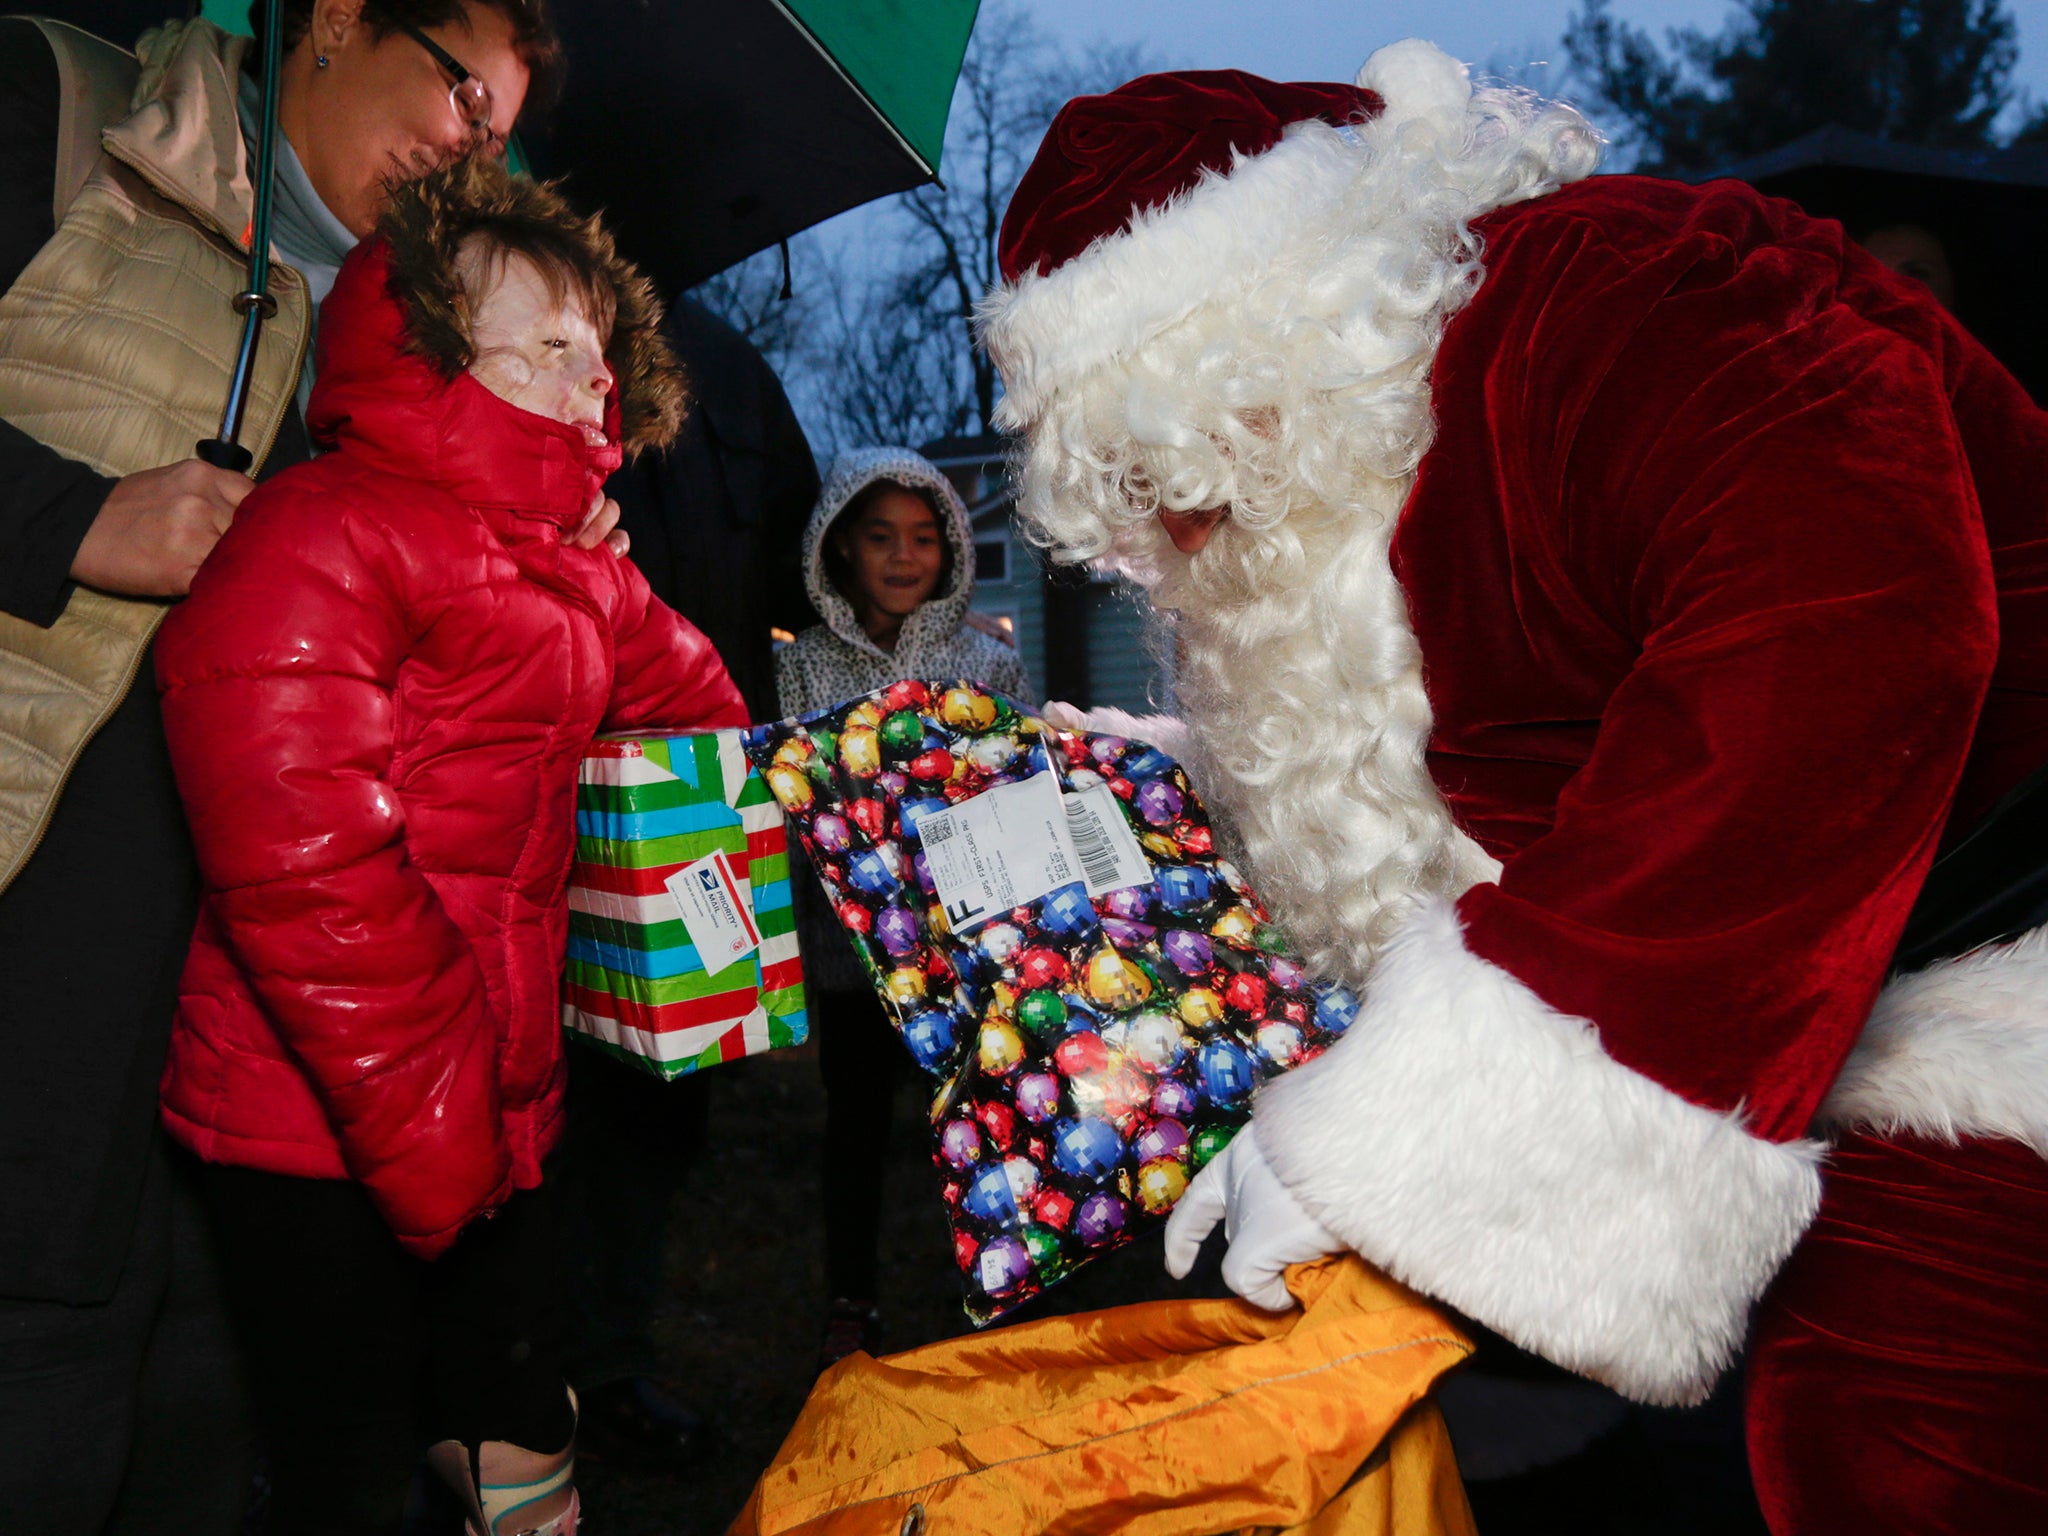 Safyre Terry receives packages from Santa Claus in Rotterdam, N.Y